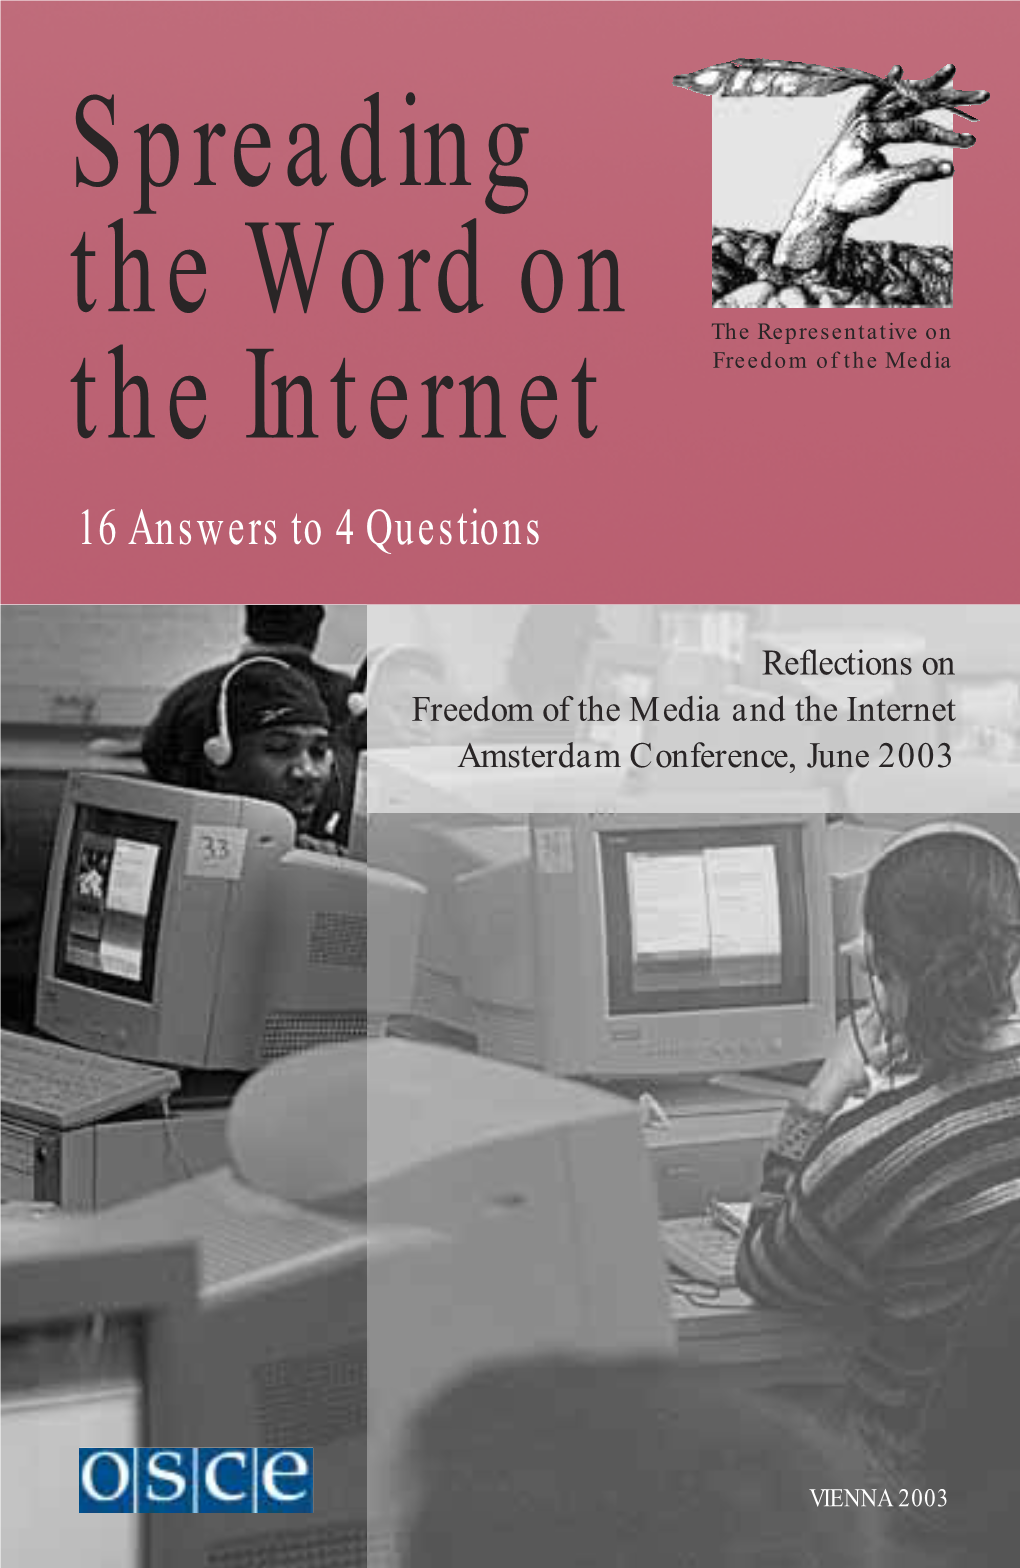 Spreading the Word on the Internet 16 Answers to 4 Questions Reflections on Freedom of the Media and the Internet Amsterdam Conference, June 2003